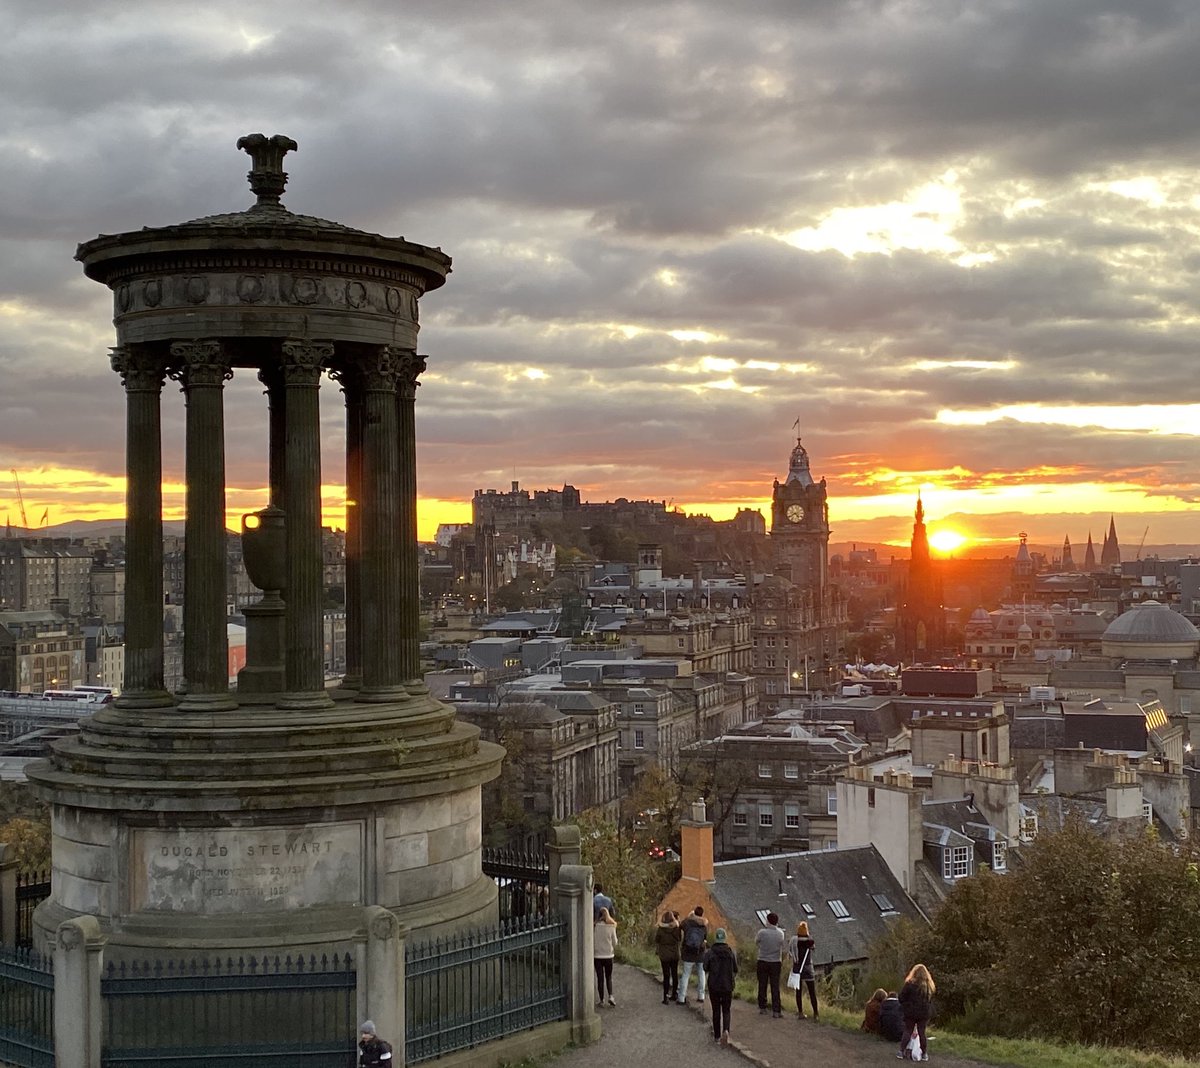 Sunset on #CaltonHill in #Edinburgh. Doesn’t get any better #VisitScotland ⁦@VisitScotland⁩